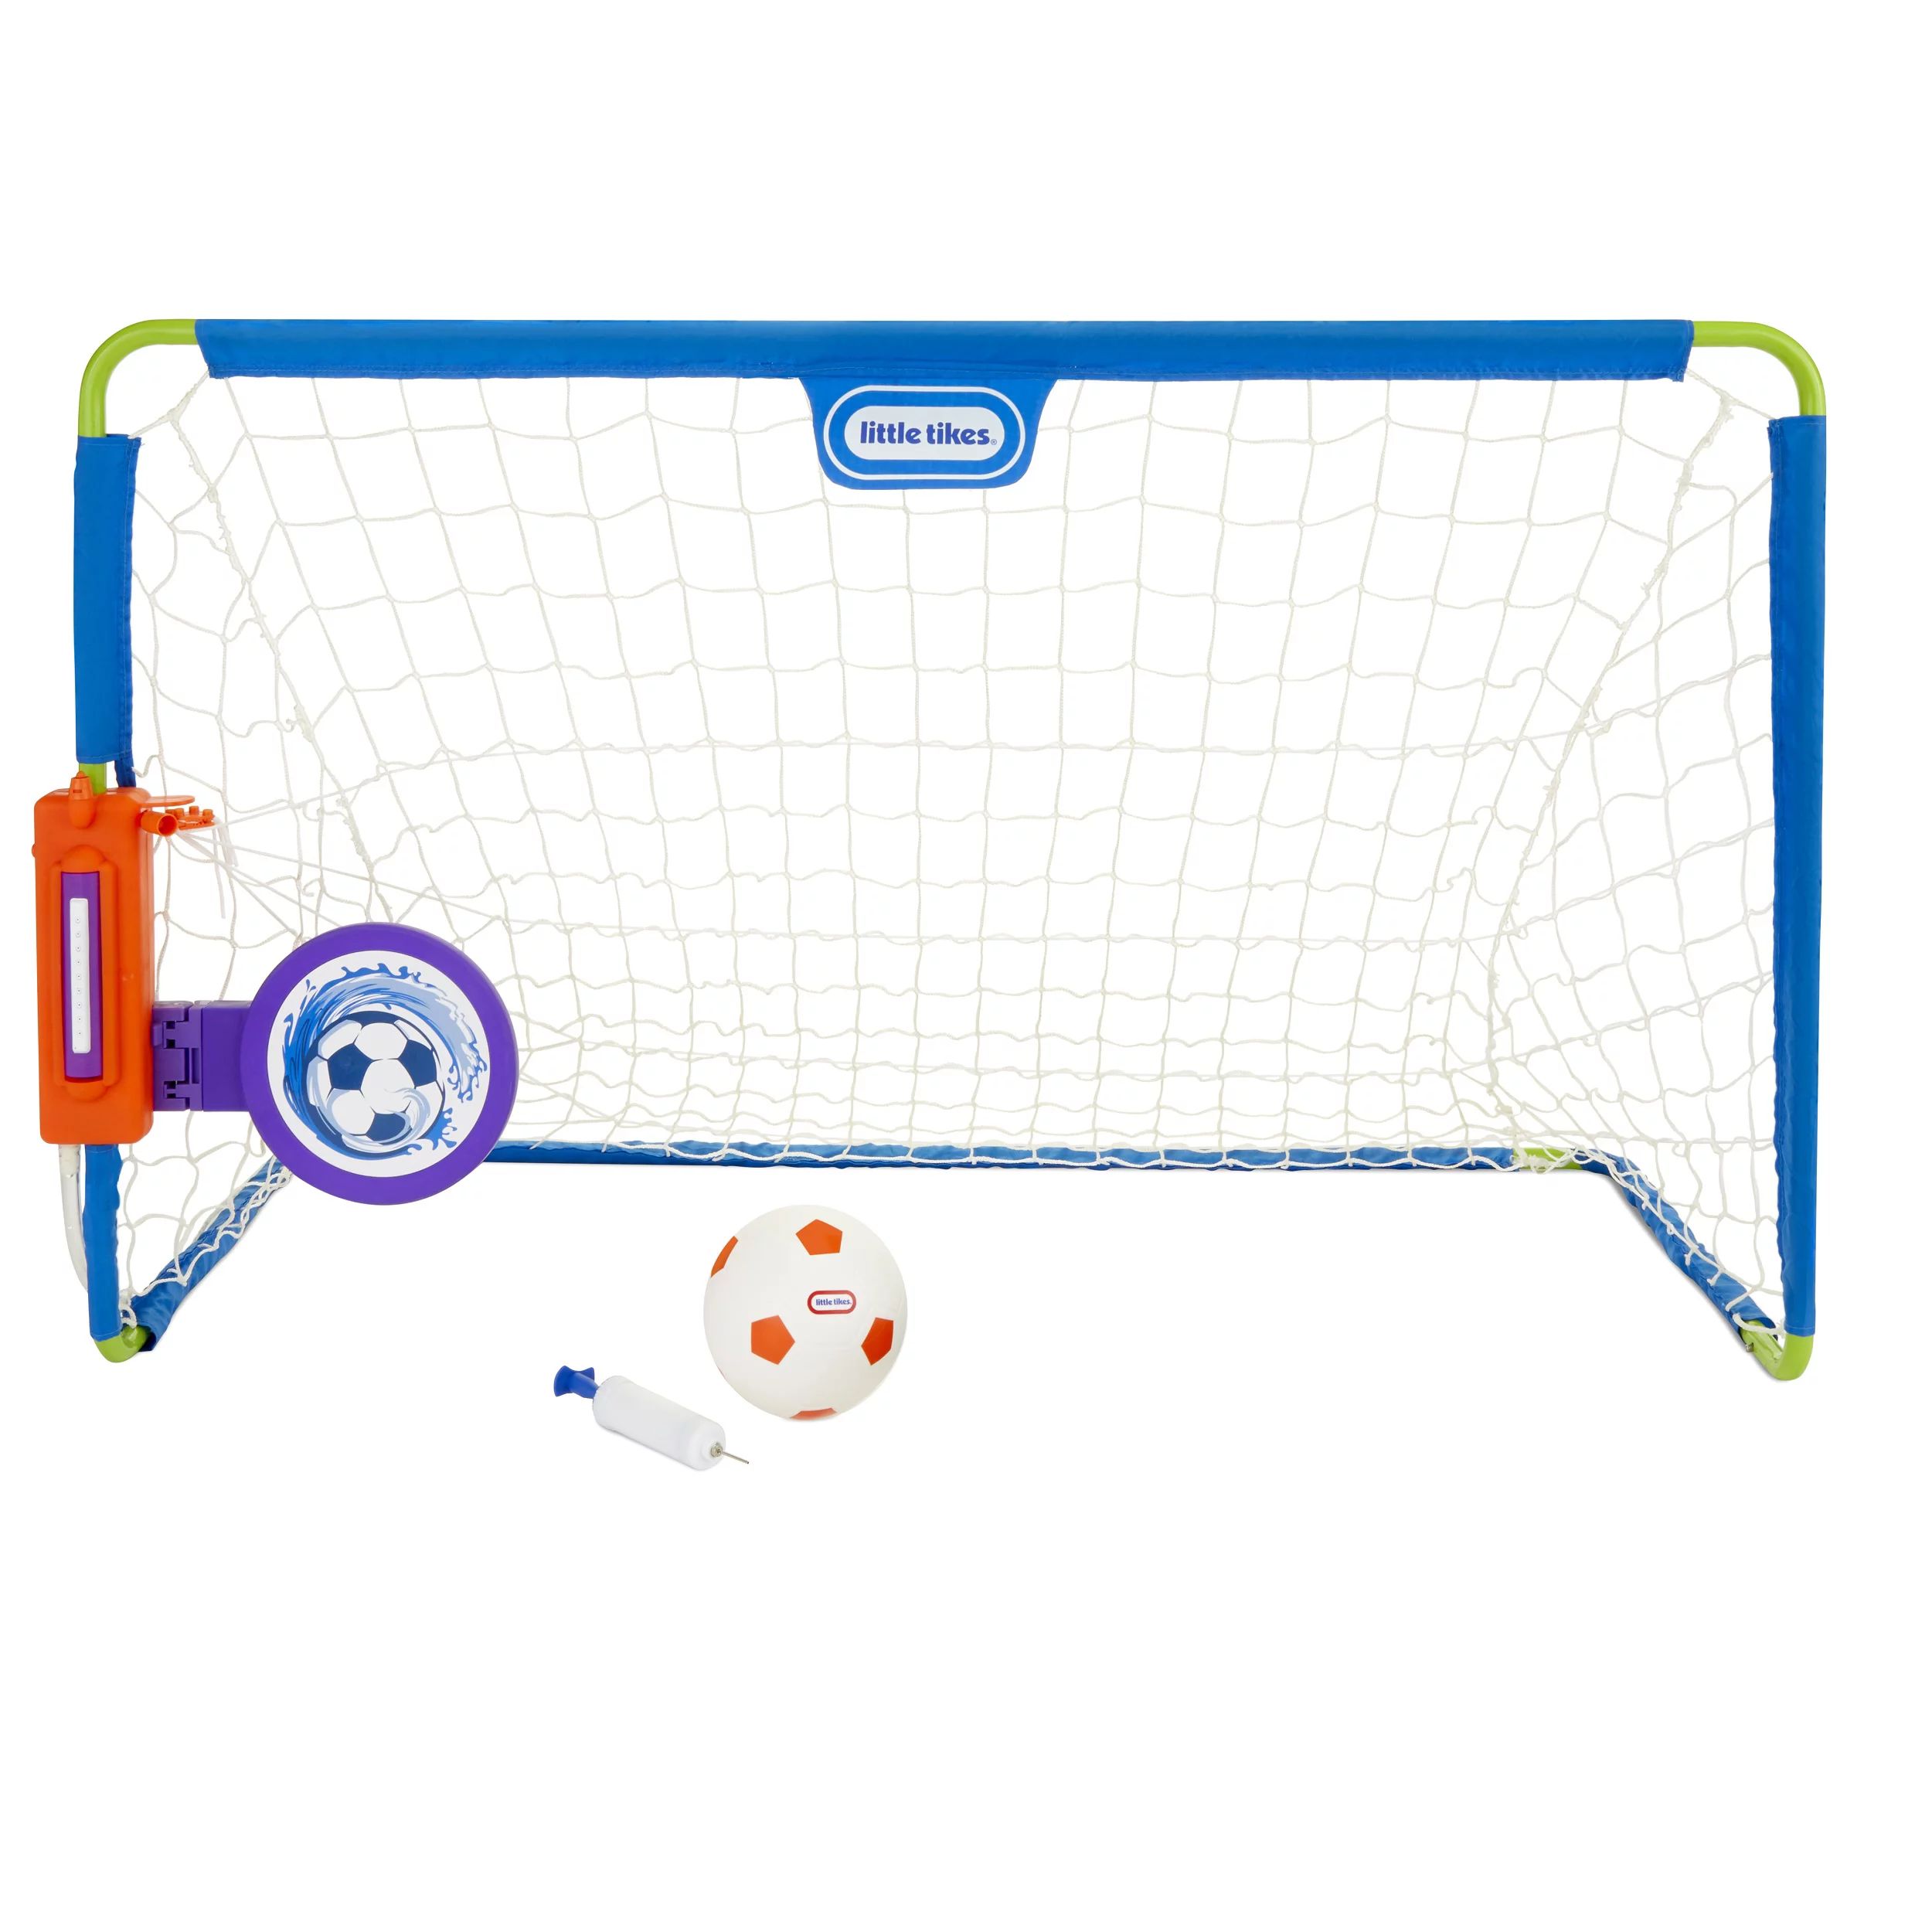 Little Tikes 2-in-1 Water Soccer and Football Sports Game with Net, Ball & Pump, Toy Sports Play ... | Walmart (US)